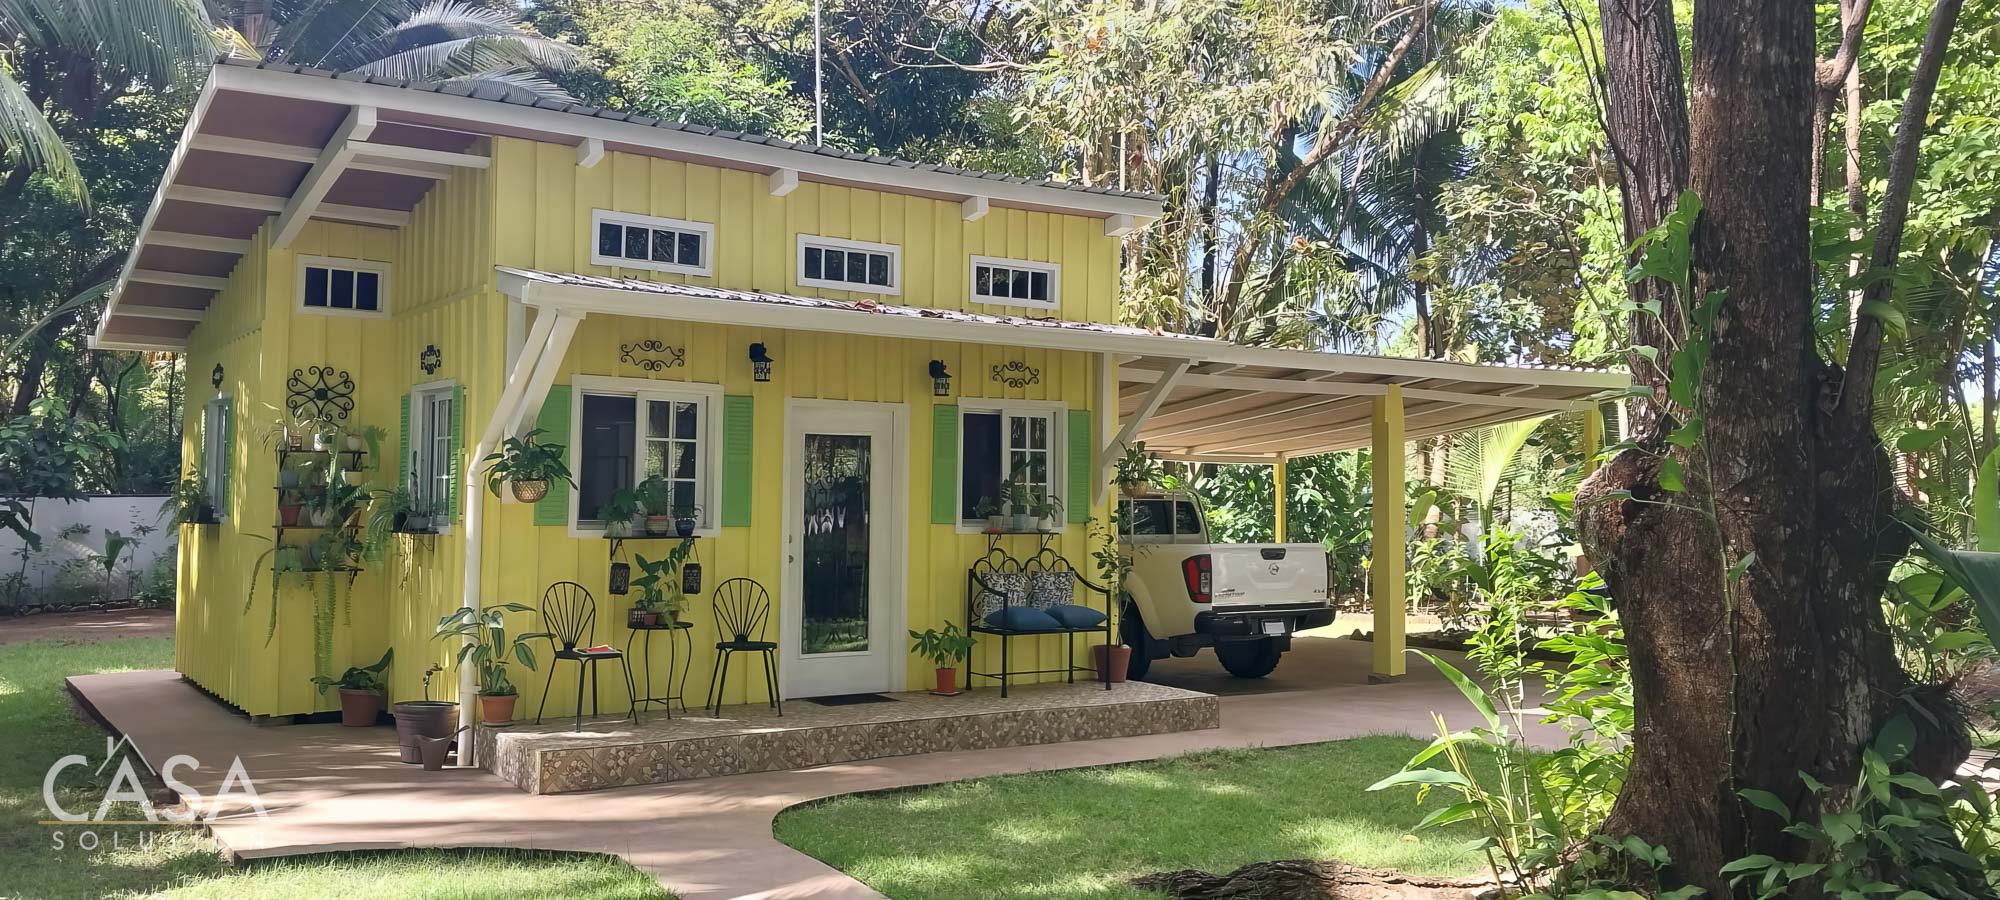 Tropical Paradise: Beach Cottage & Nature Haven in Punta Burica, Panama. Just a Few Steps from the Shore